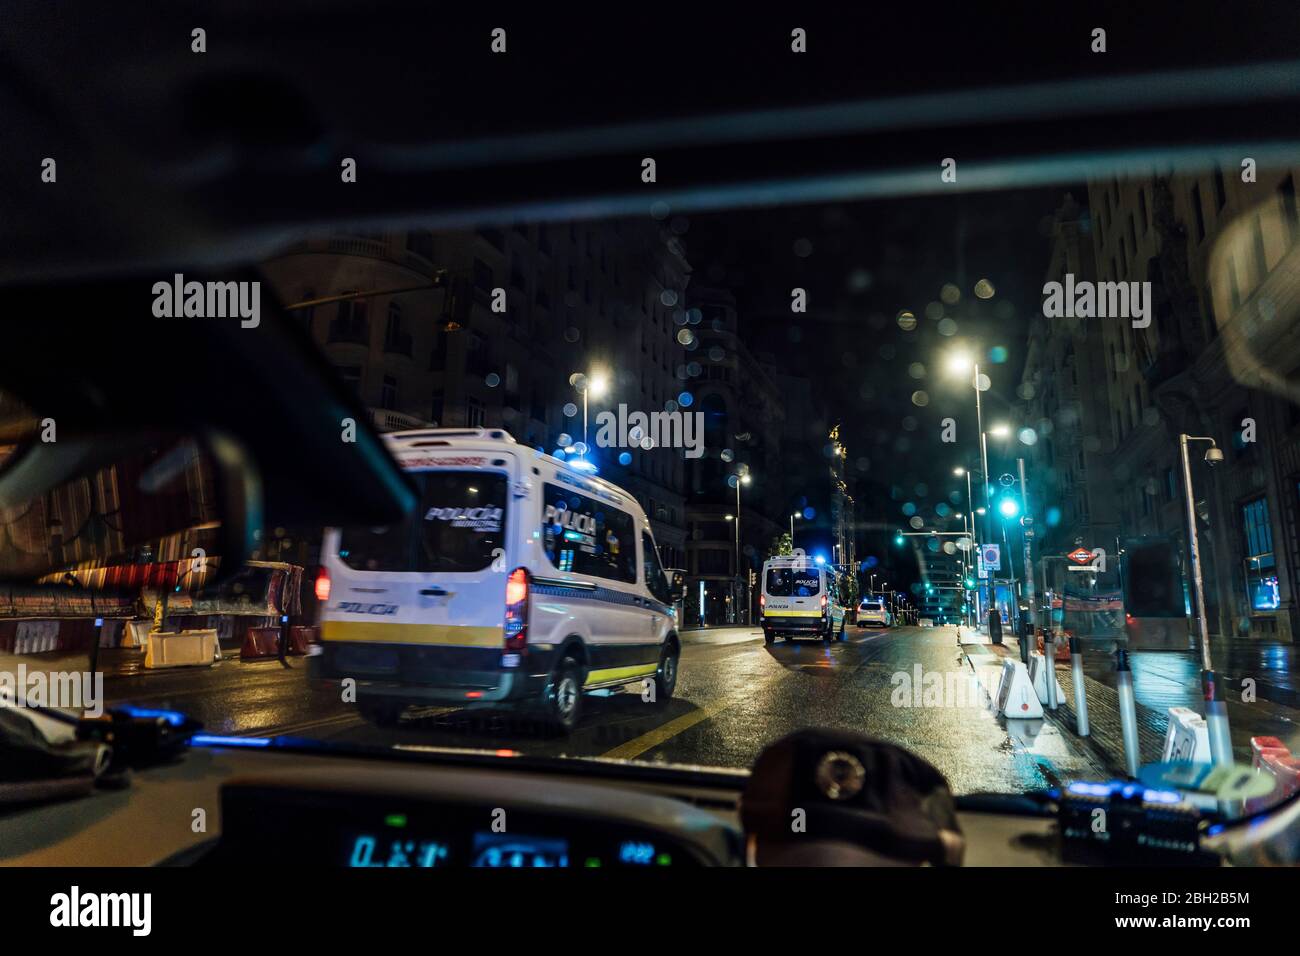 Spain, Madrid, Interior of car driving behind police at night Stock Photo